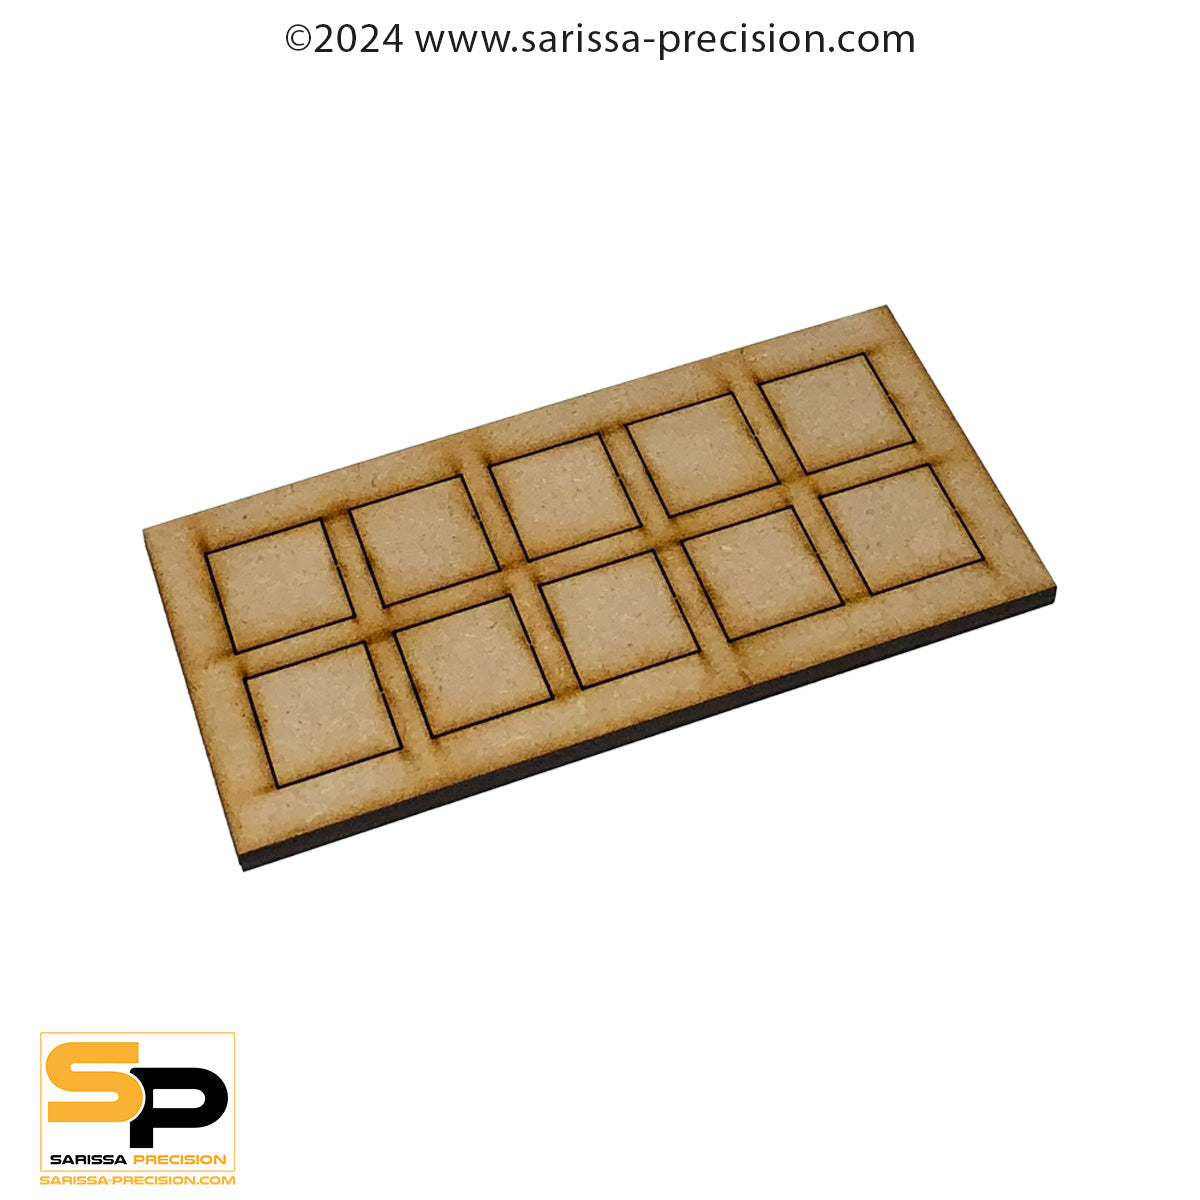 9x5 25x25mm Conversion Tray for 20x20mm bases